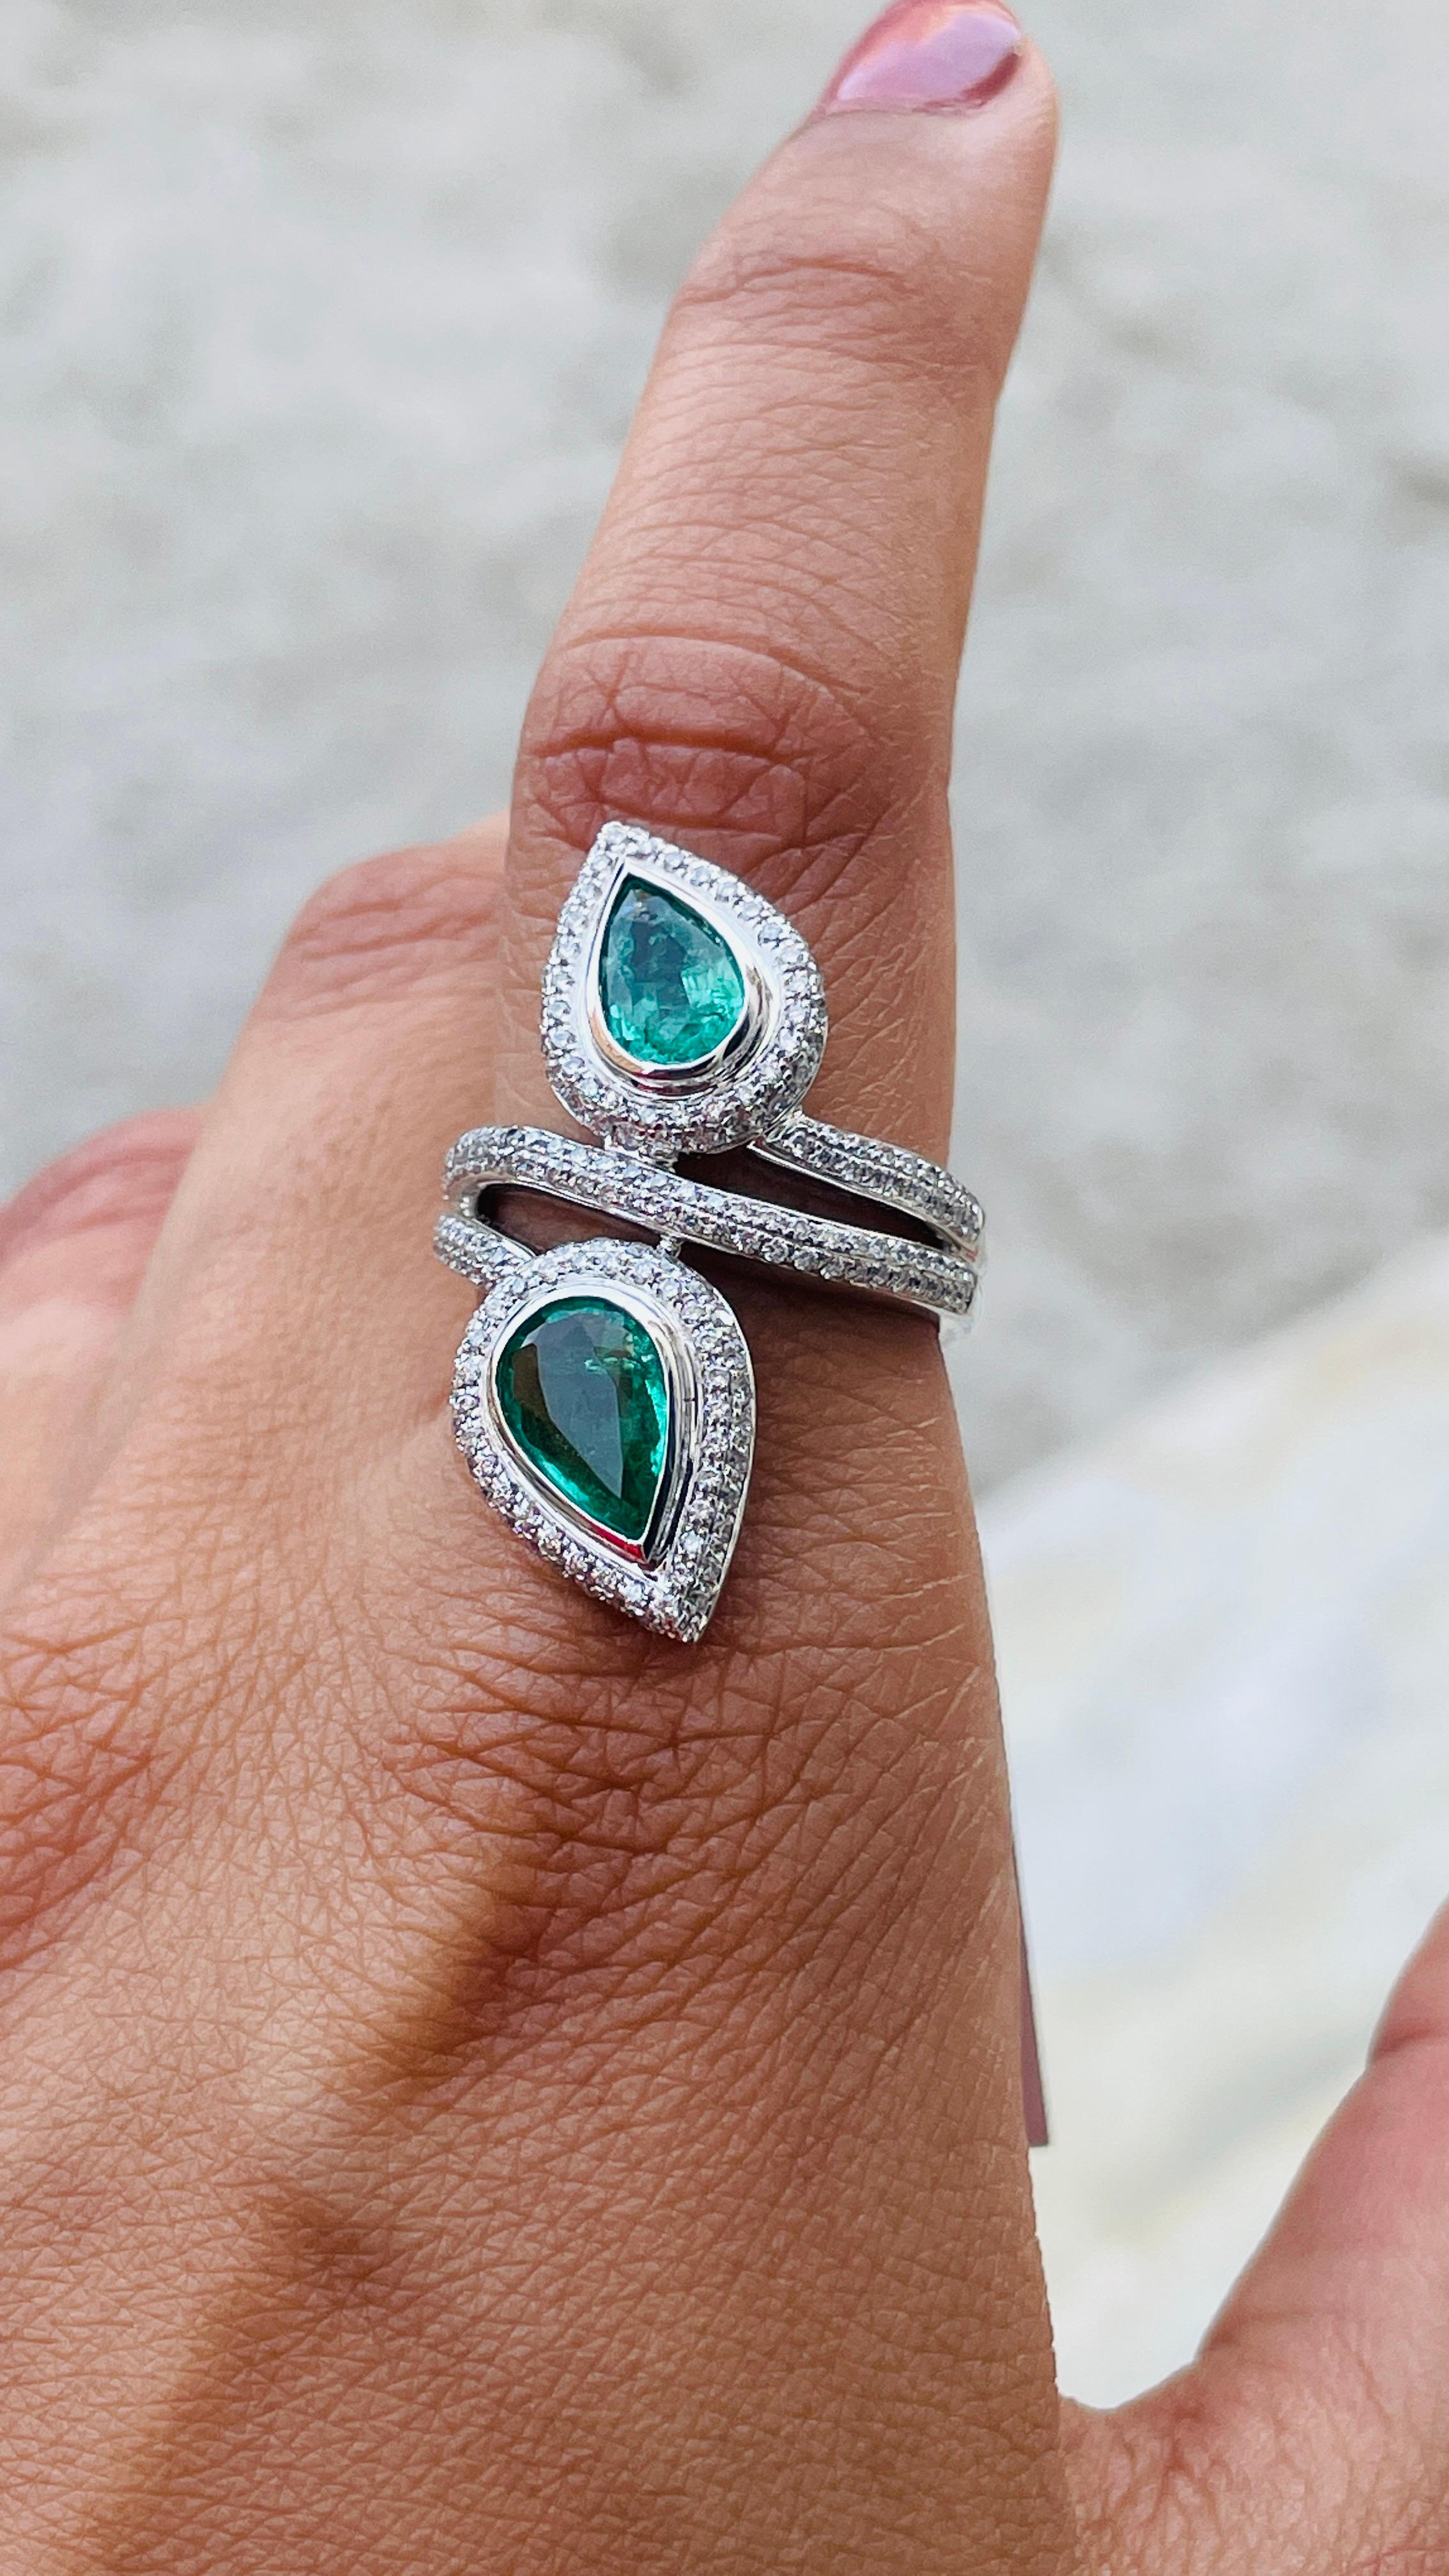 For Sale:  Pear Cut Emerald Cocktail Ring with Diamonds in 14K Solid White Gold 6